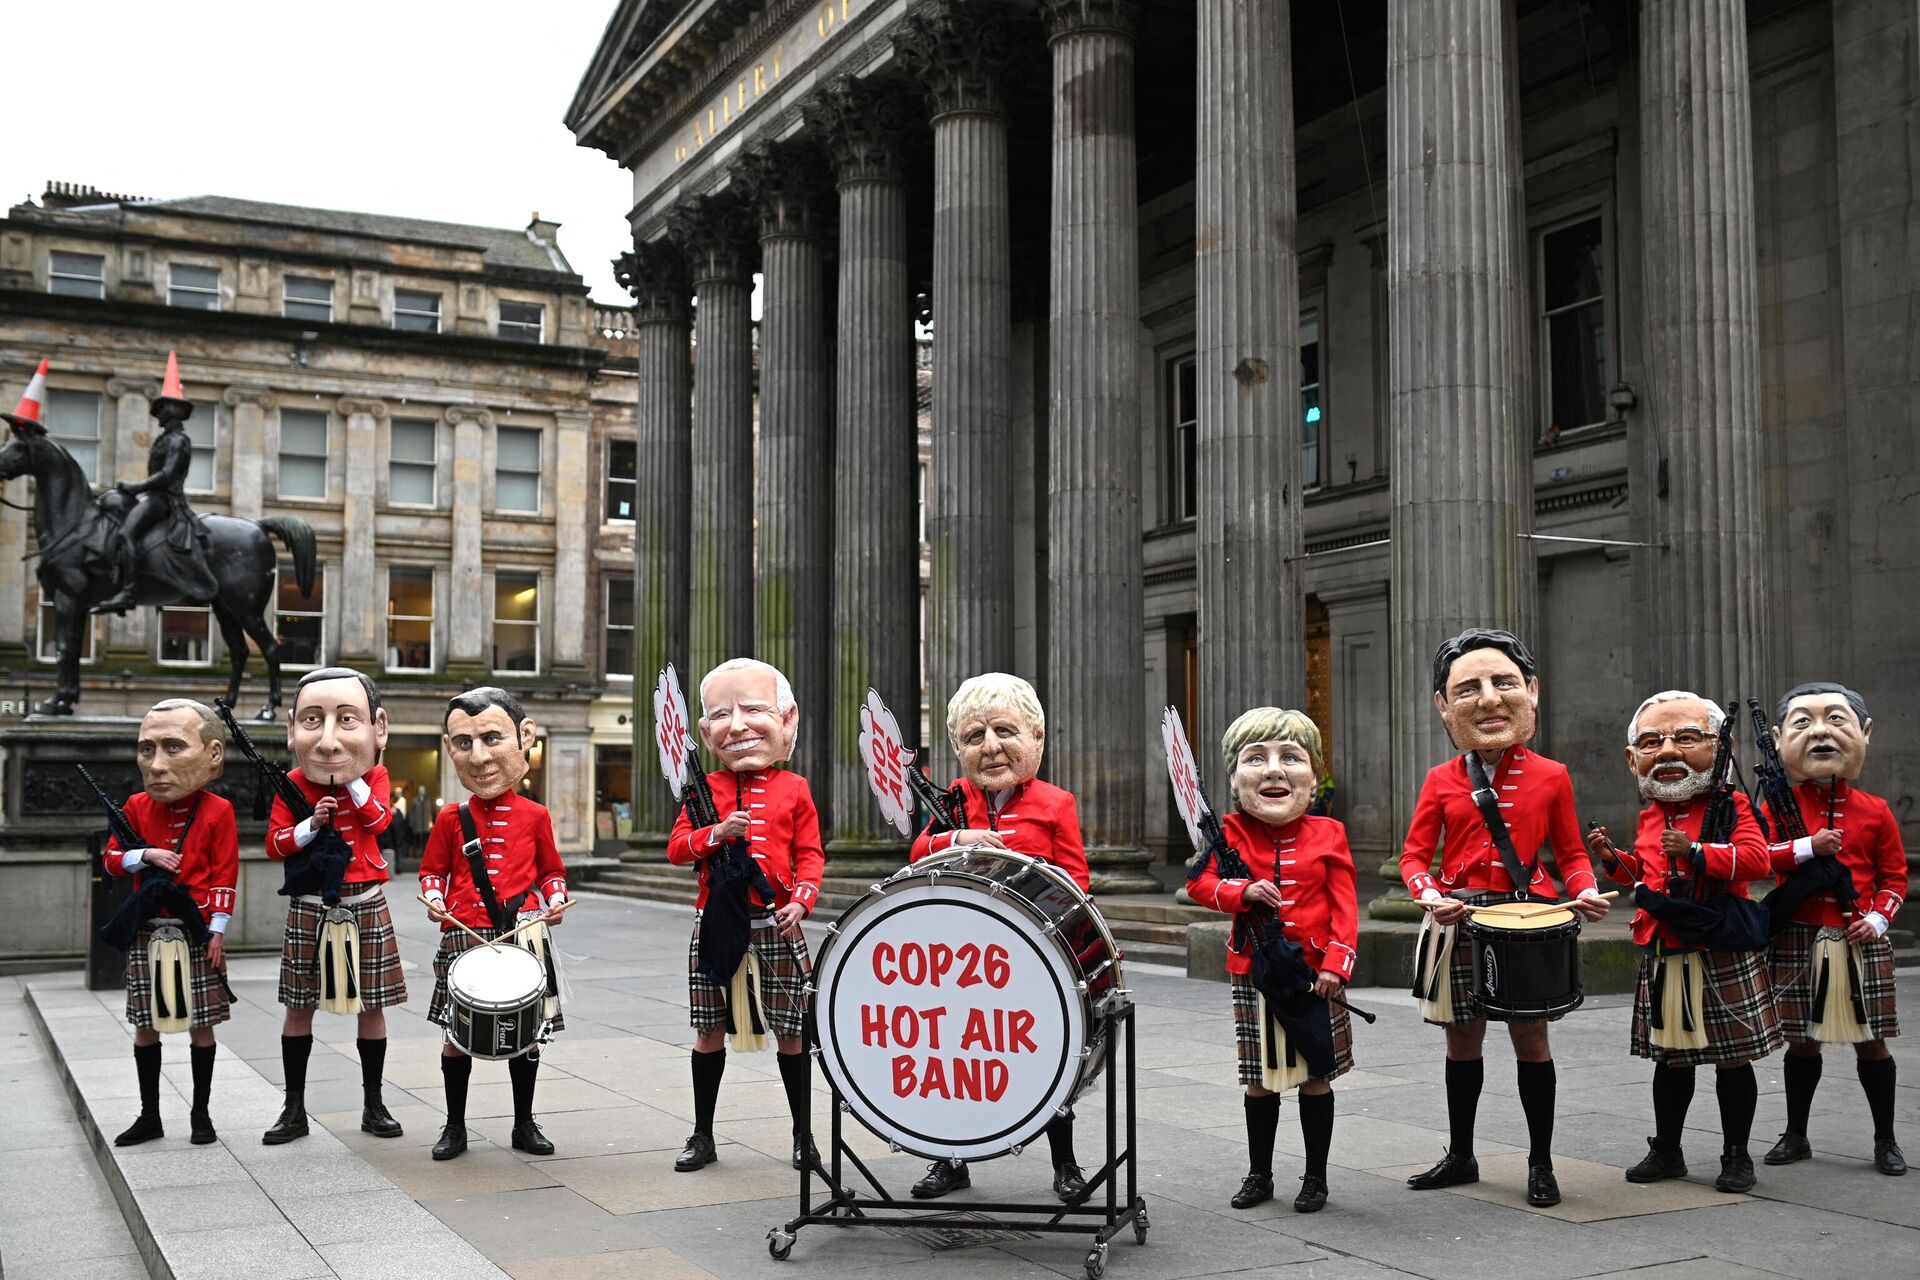 Oxfam activists dressed as a Scottish pipe band and representing (L-R) Russian President Vladimir Putin, Italian Prime Minister Mario Draghi, French President Emmanuel Macron, US President Joe Biden, British Prime Minister Boris Johnson, Germany's Chancellor Angela Merkel, Canadian Prime Minister Justin Trudeau, India's Prime Minister Narendra Modi and Chinese President Xi Jinping pose during their Big Heads protest stunt at the Royal Exchange Square in Glasgow on November 1, 2021 on the sidelines of the COP26 UN Climate Summit.  - Sputnik International, 1920, 01.11.2021